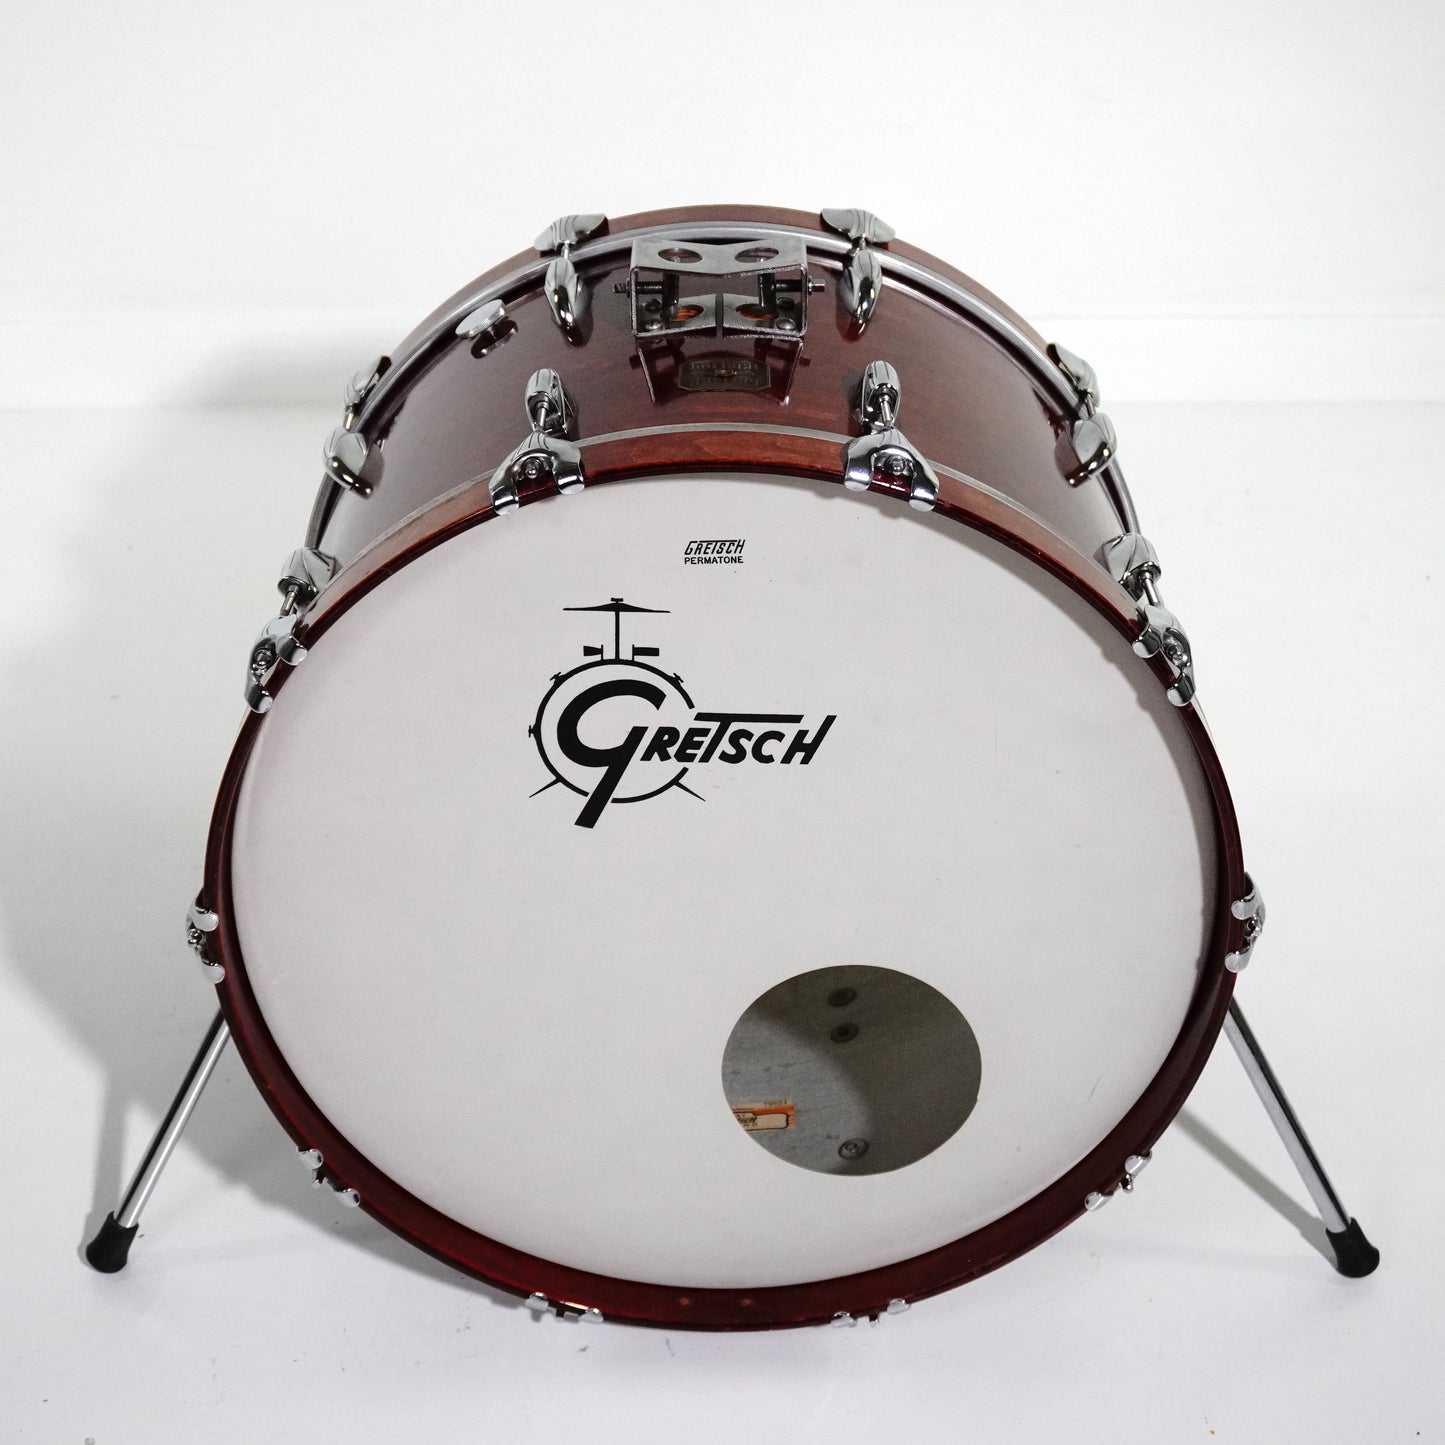 Gretsch USA 22” x 14” Bass Drum in Simulated Rosewood 1978-1979